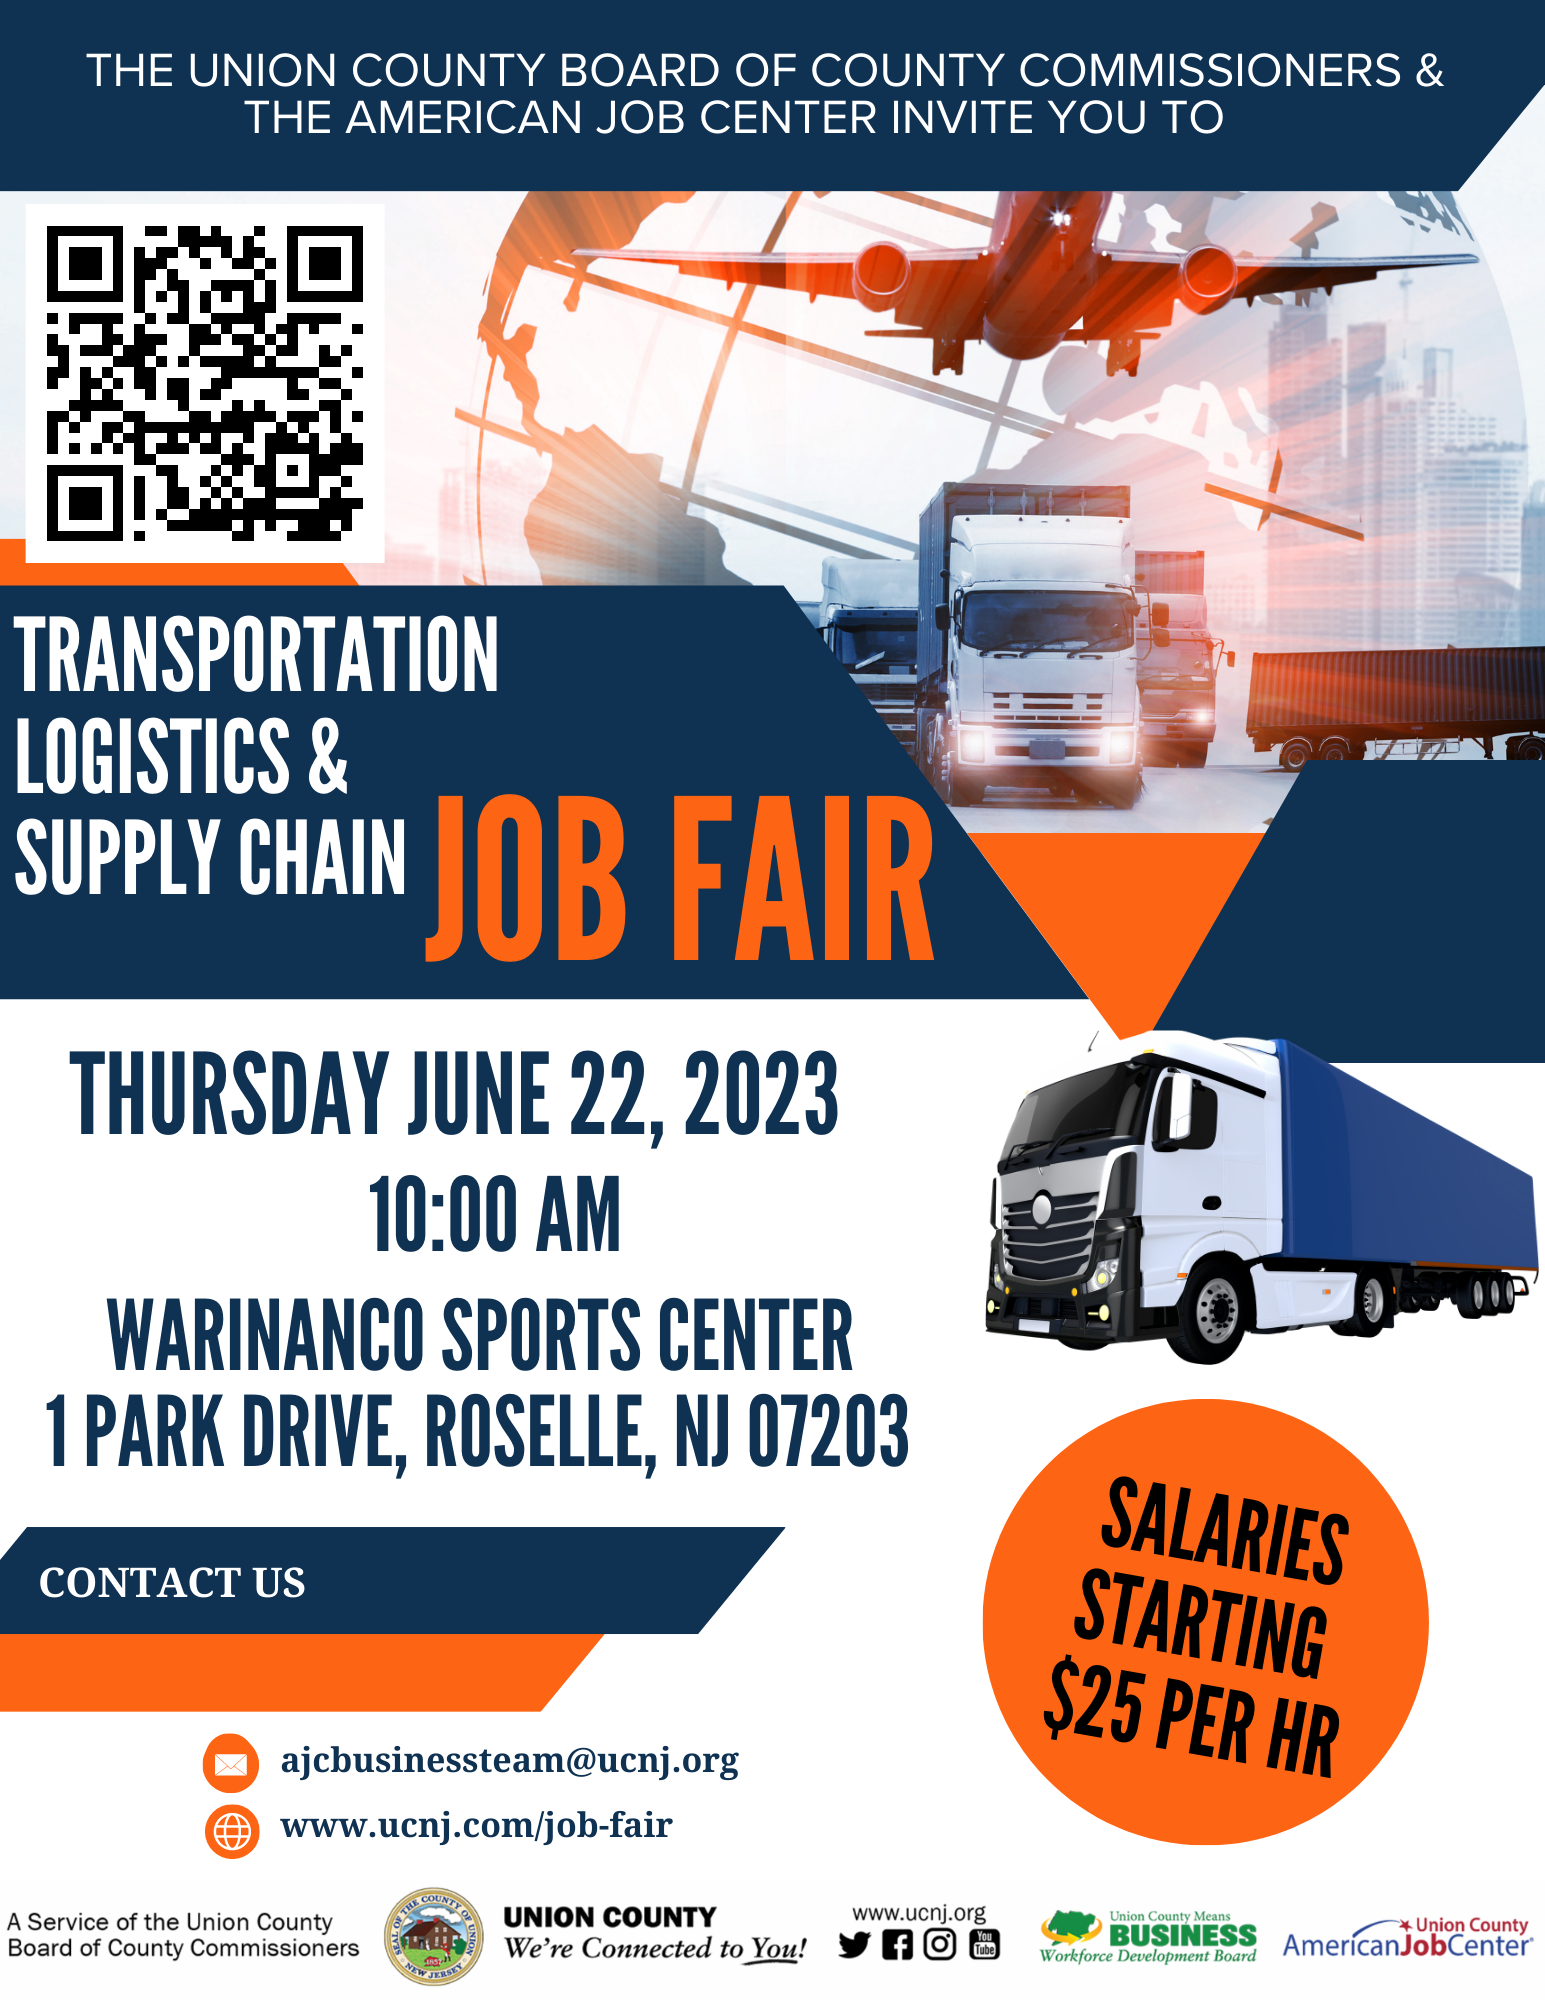 Union County to host Transportation, Logistic & Supply Chain Job Fair